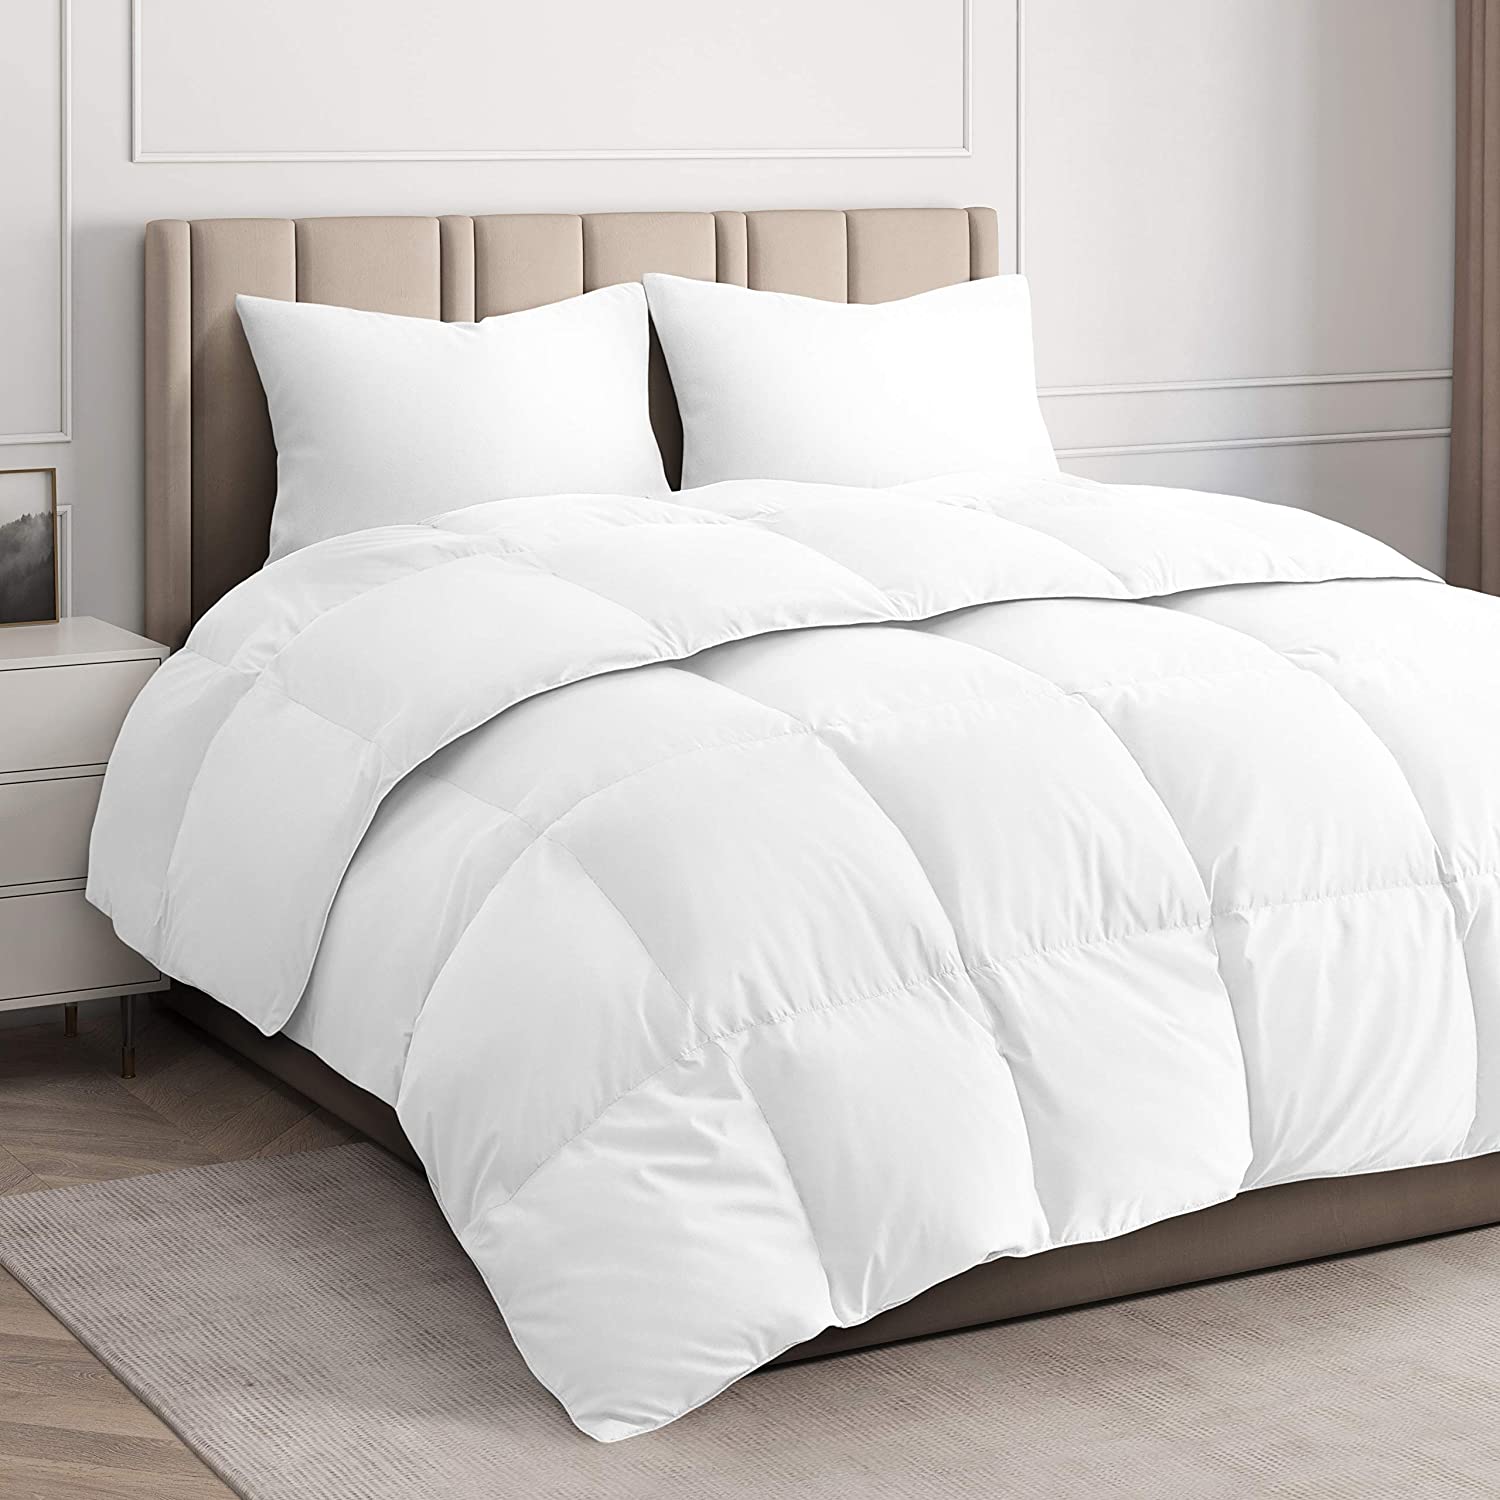 CGK Unlimited Washer-Friendly Siliconized Fiberfilled Comforter